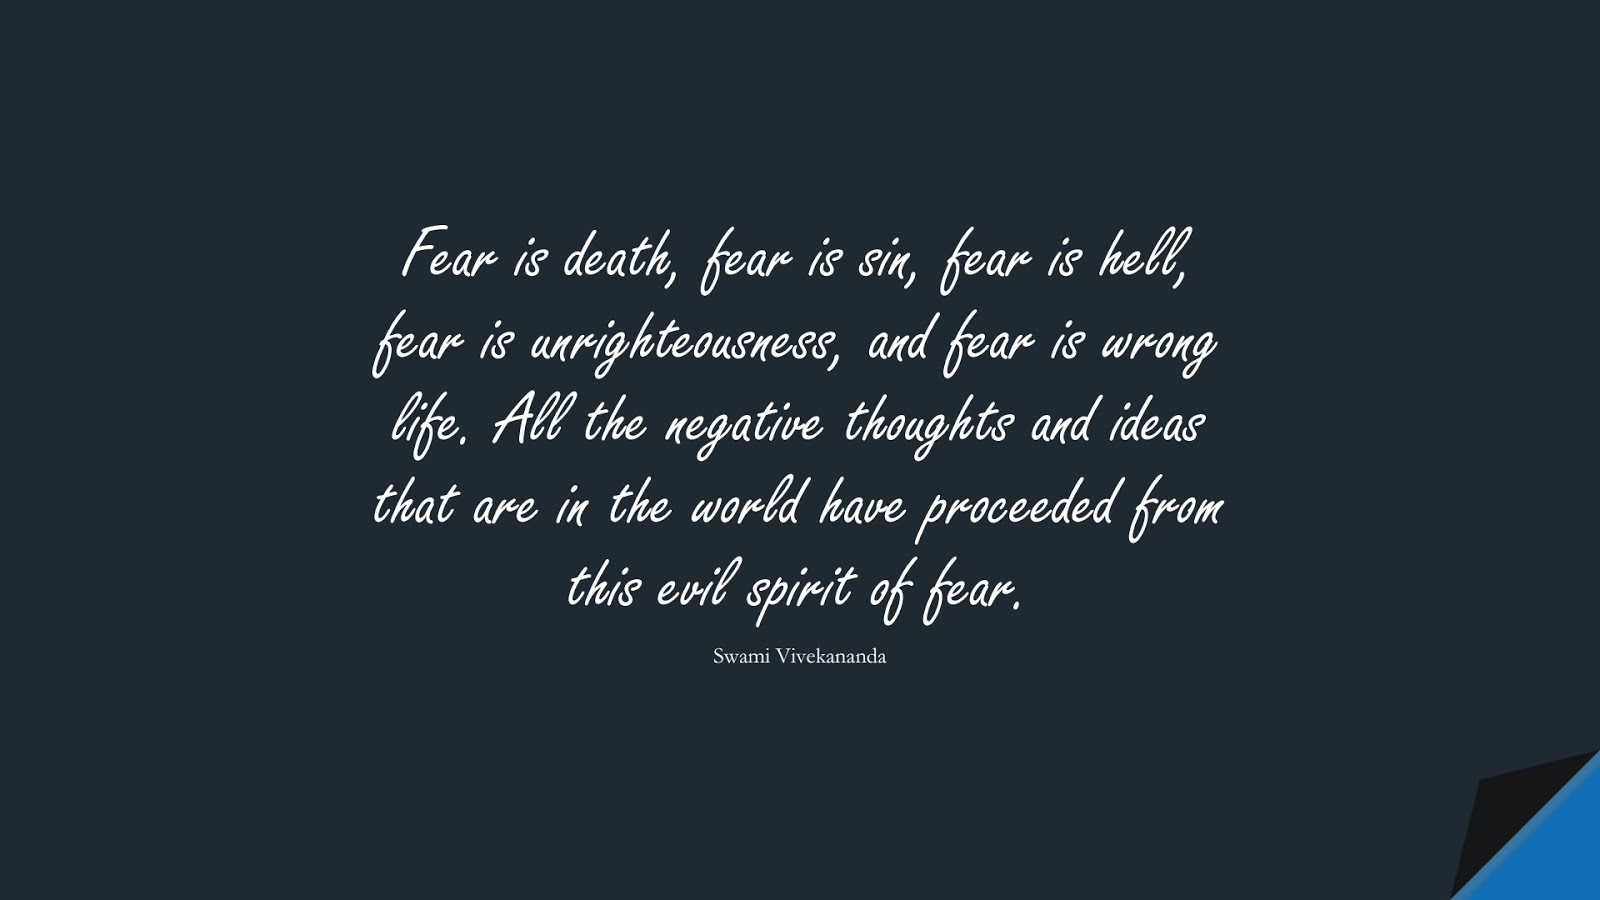 Fear is death, fear is sin, fear is hell, fear is unrighteousness, and fear is wrong life. All the negative thoughts and ideas that are in the world have proceeded from this evil spirit of fear. (Swami Vivekananda);  #FearQuotes